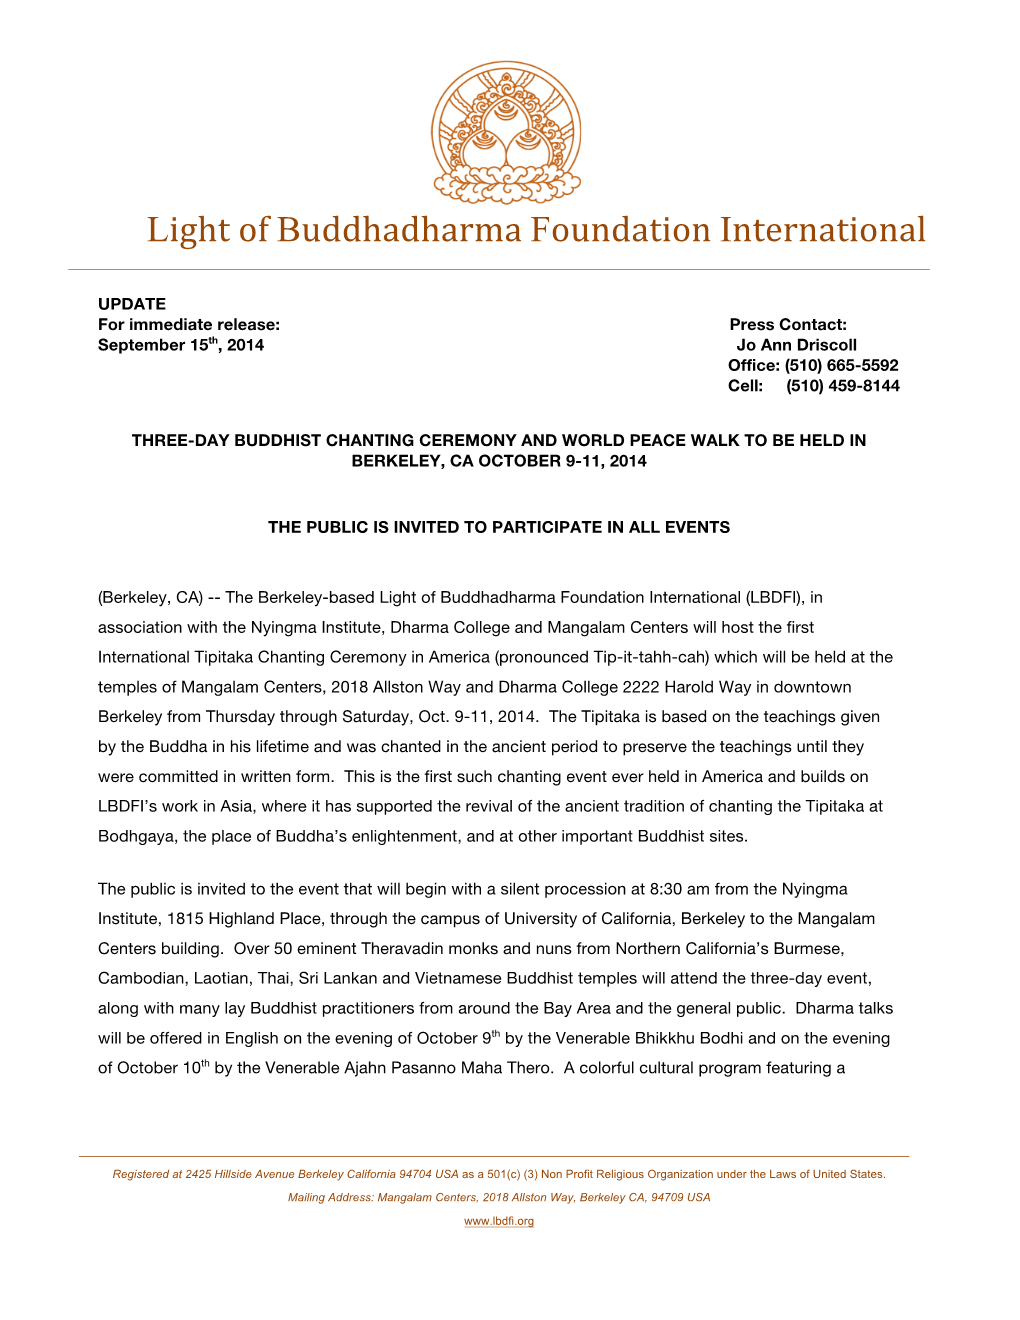 Download the LBDFI Press Release Here